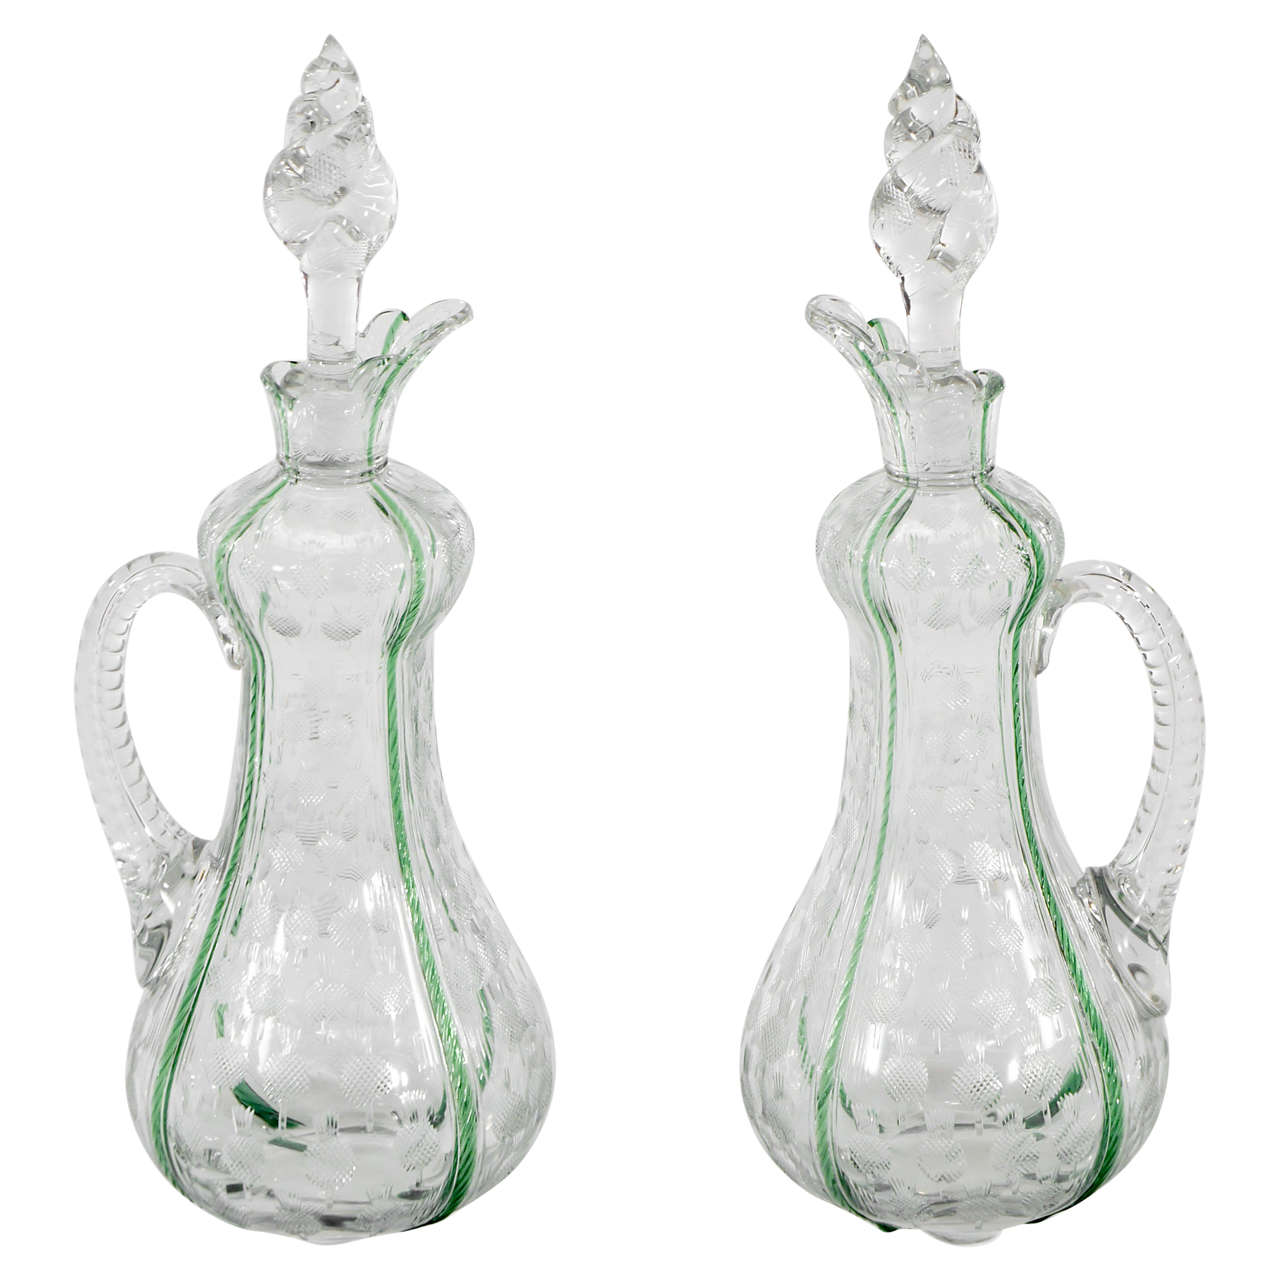 Stevens & Williams Pair of Crystal Decanters w/ Engraving & Applied Handles